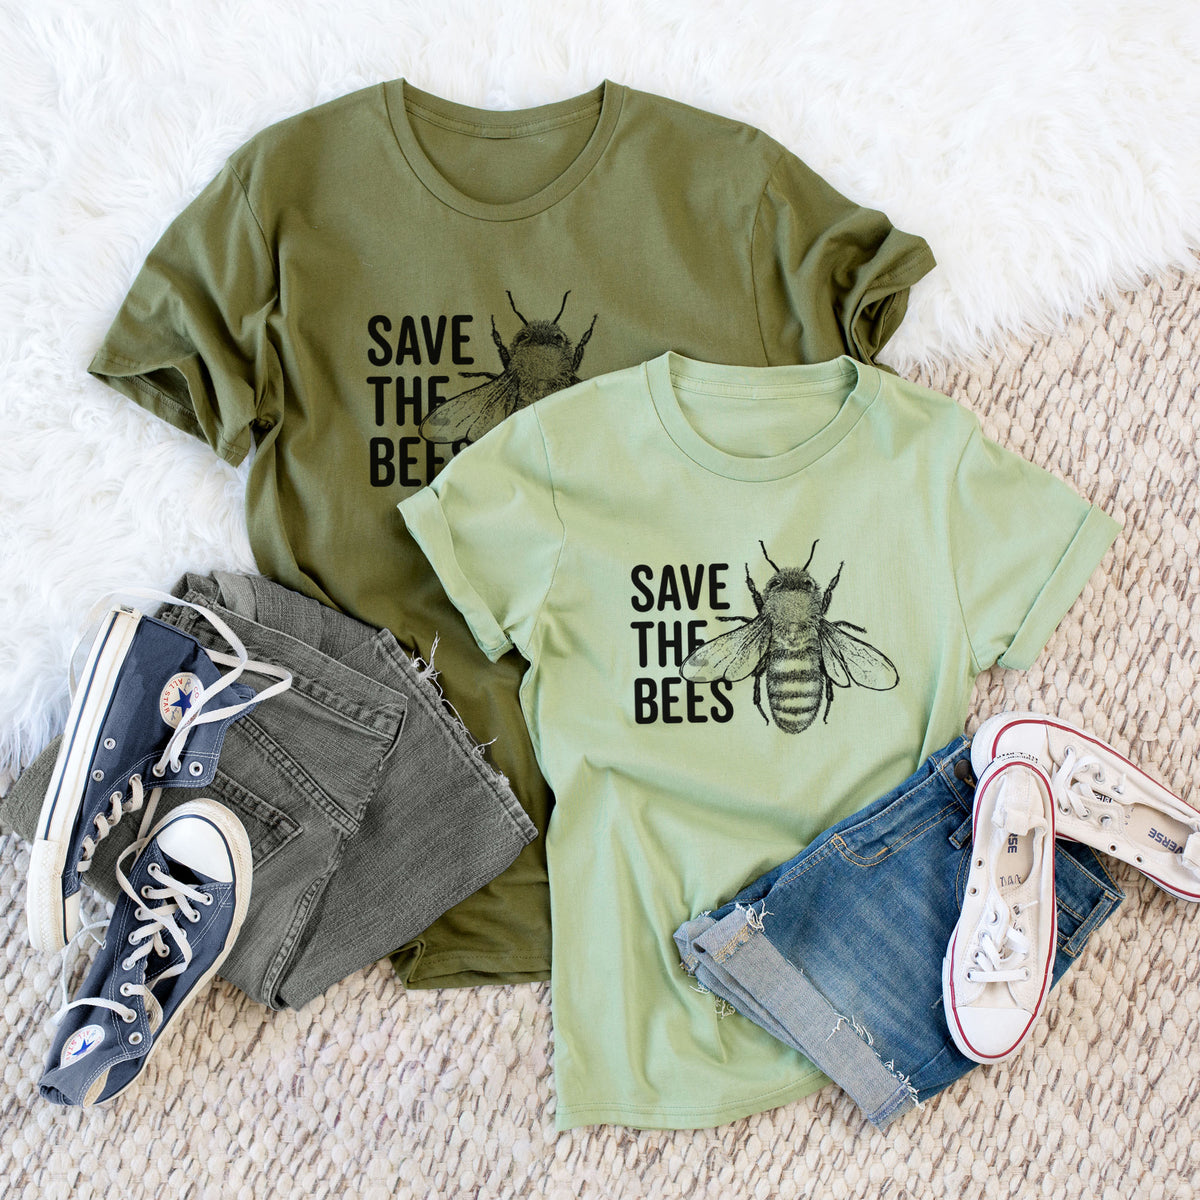 Save the Bees - Unisex Crewneck - Made in USA - 100% Organic Cotton